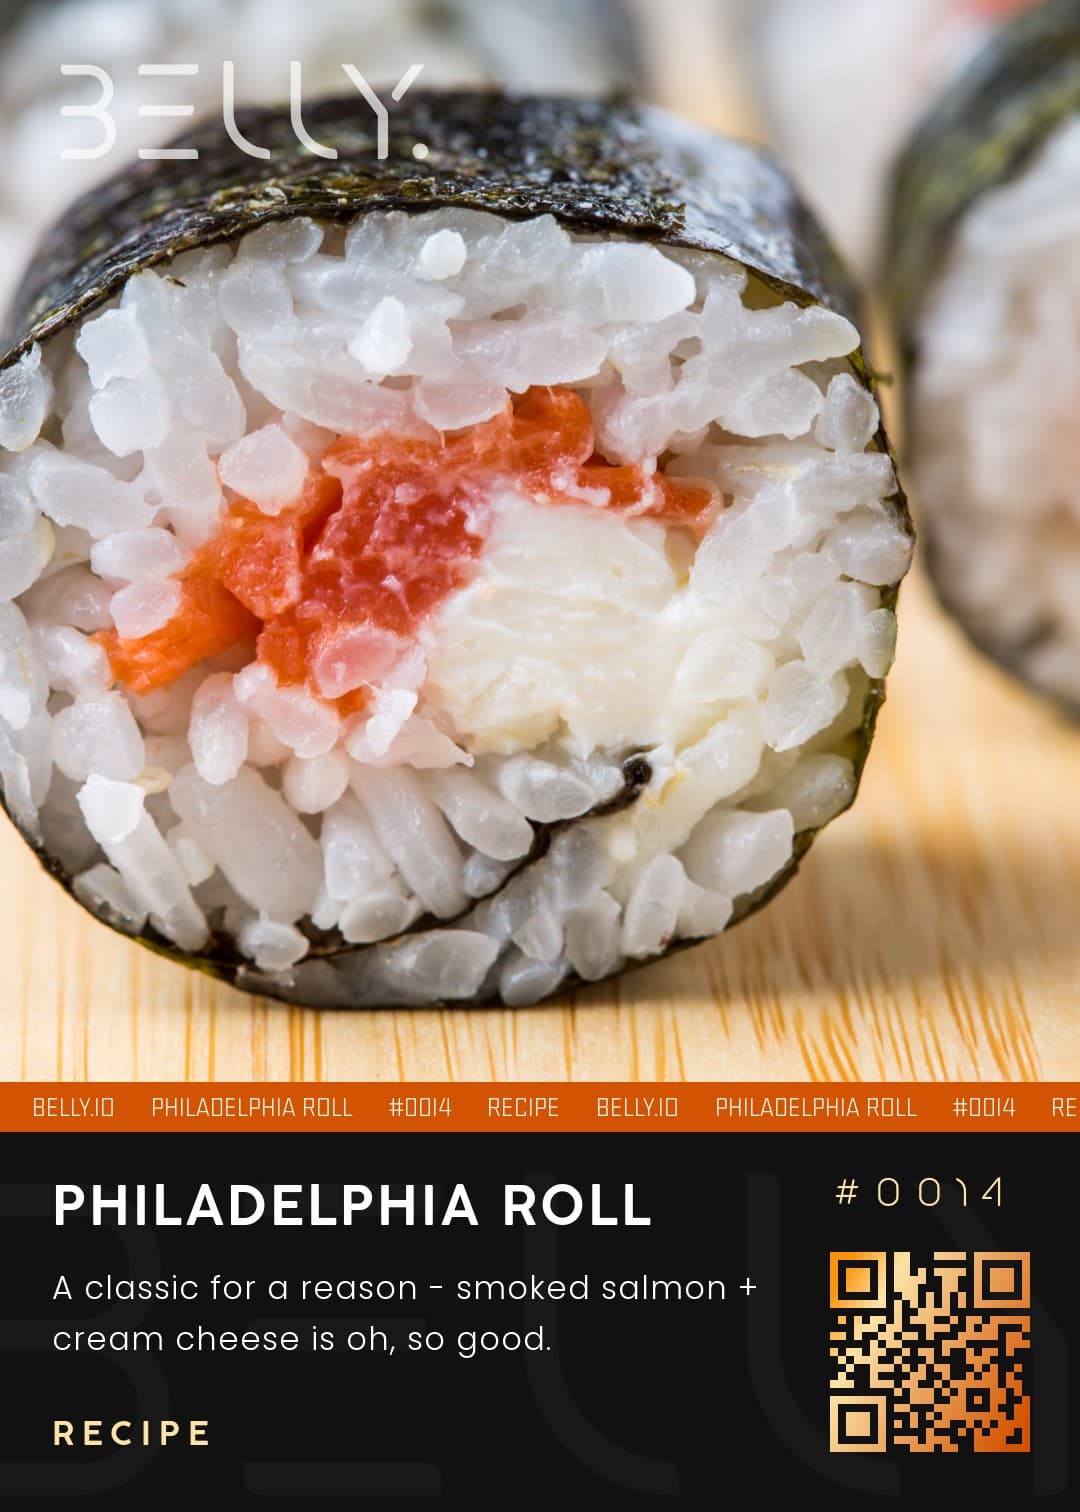 Philadelphia Roll - A classic for a reason - smoked salmon + cream cheese is oh, so good.